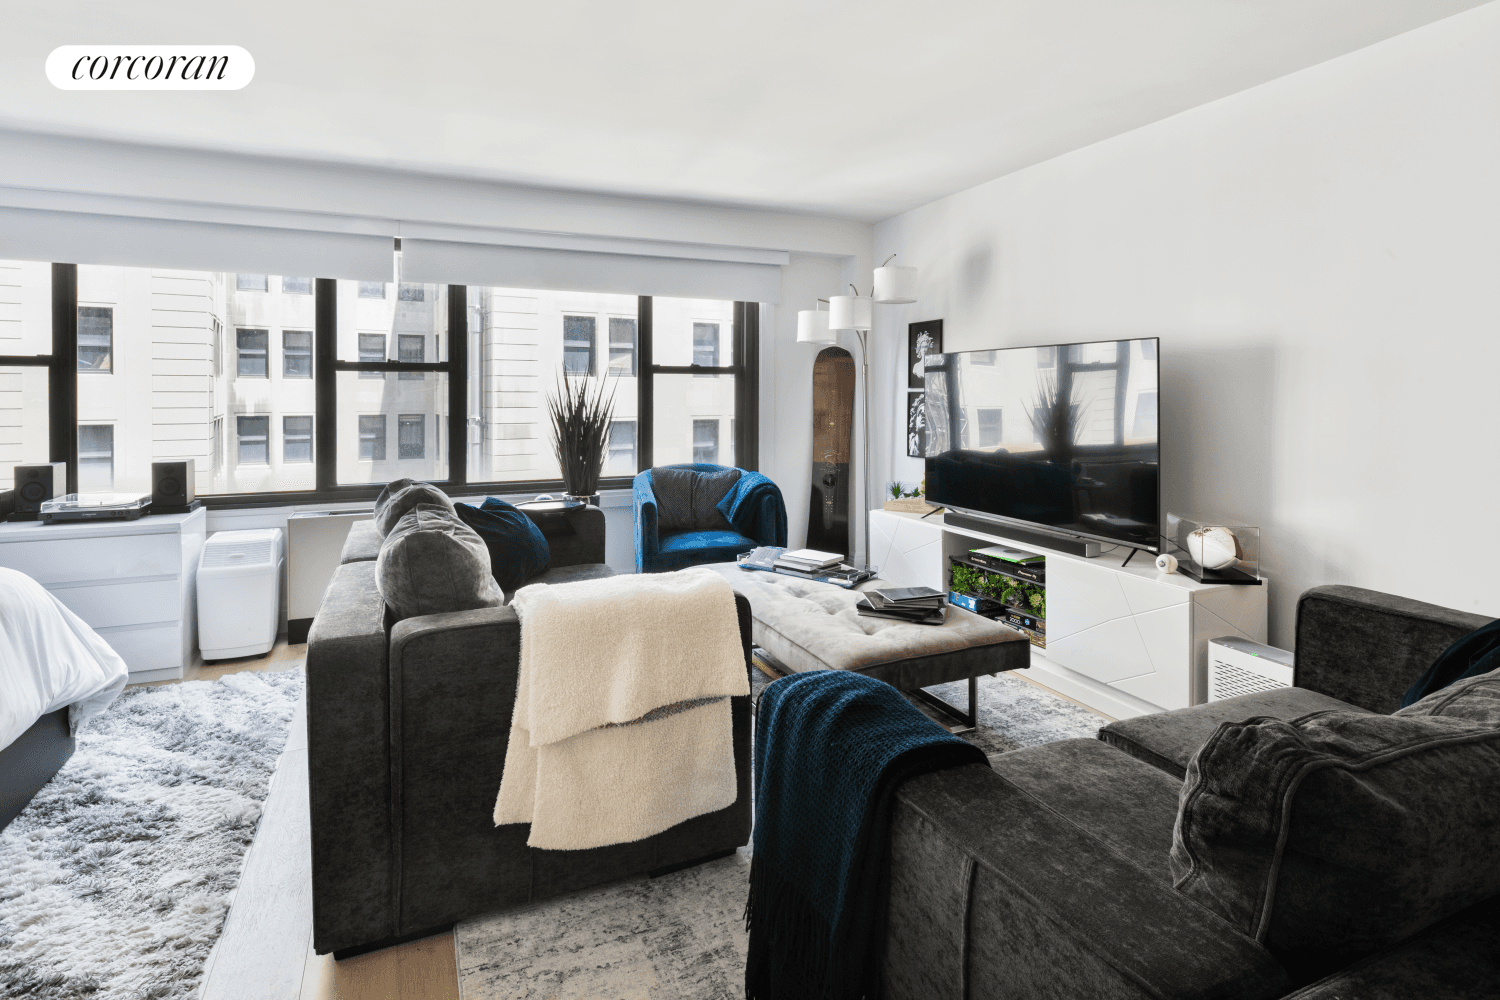 Welcome to this beautifully gut renovated one bedroom home in a full service doorman building on the border of Brooklyn Heights and Downtown Brooklyn.